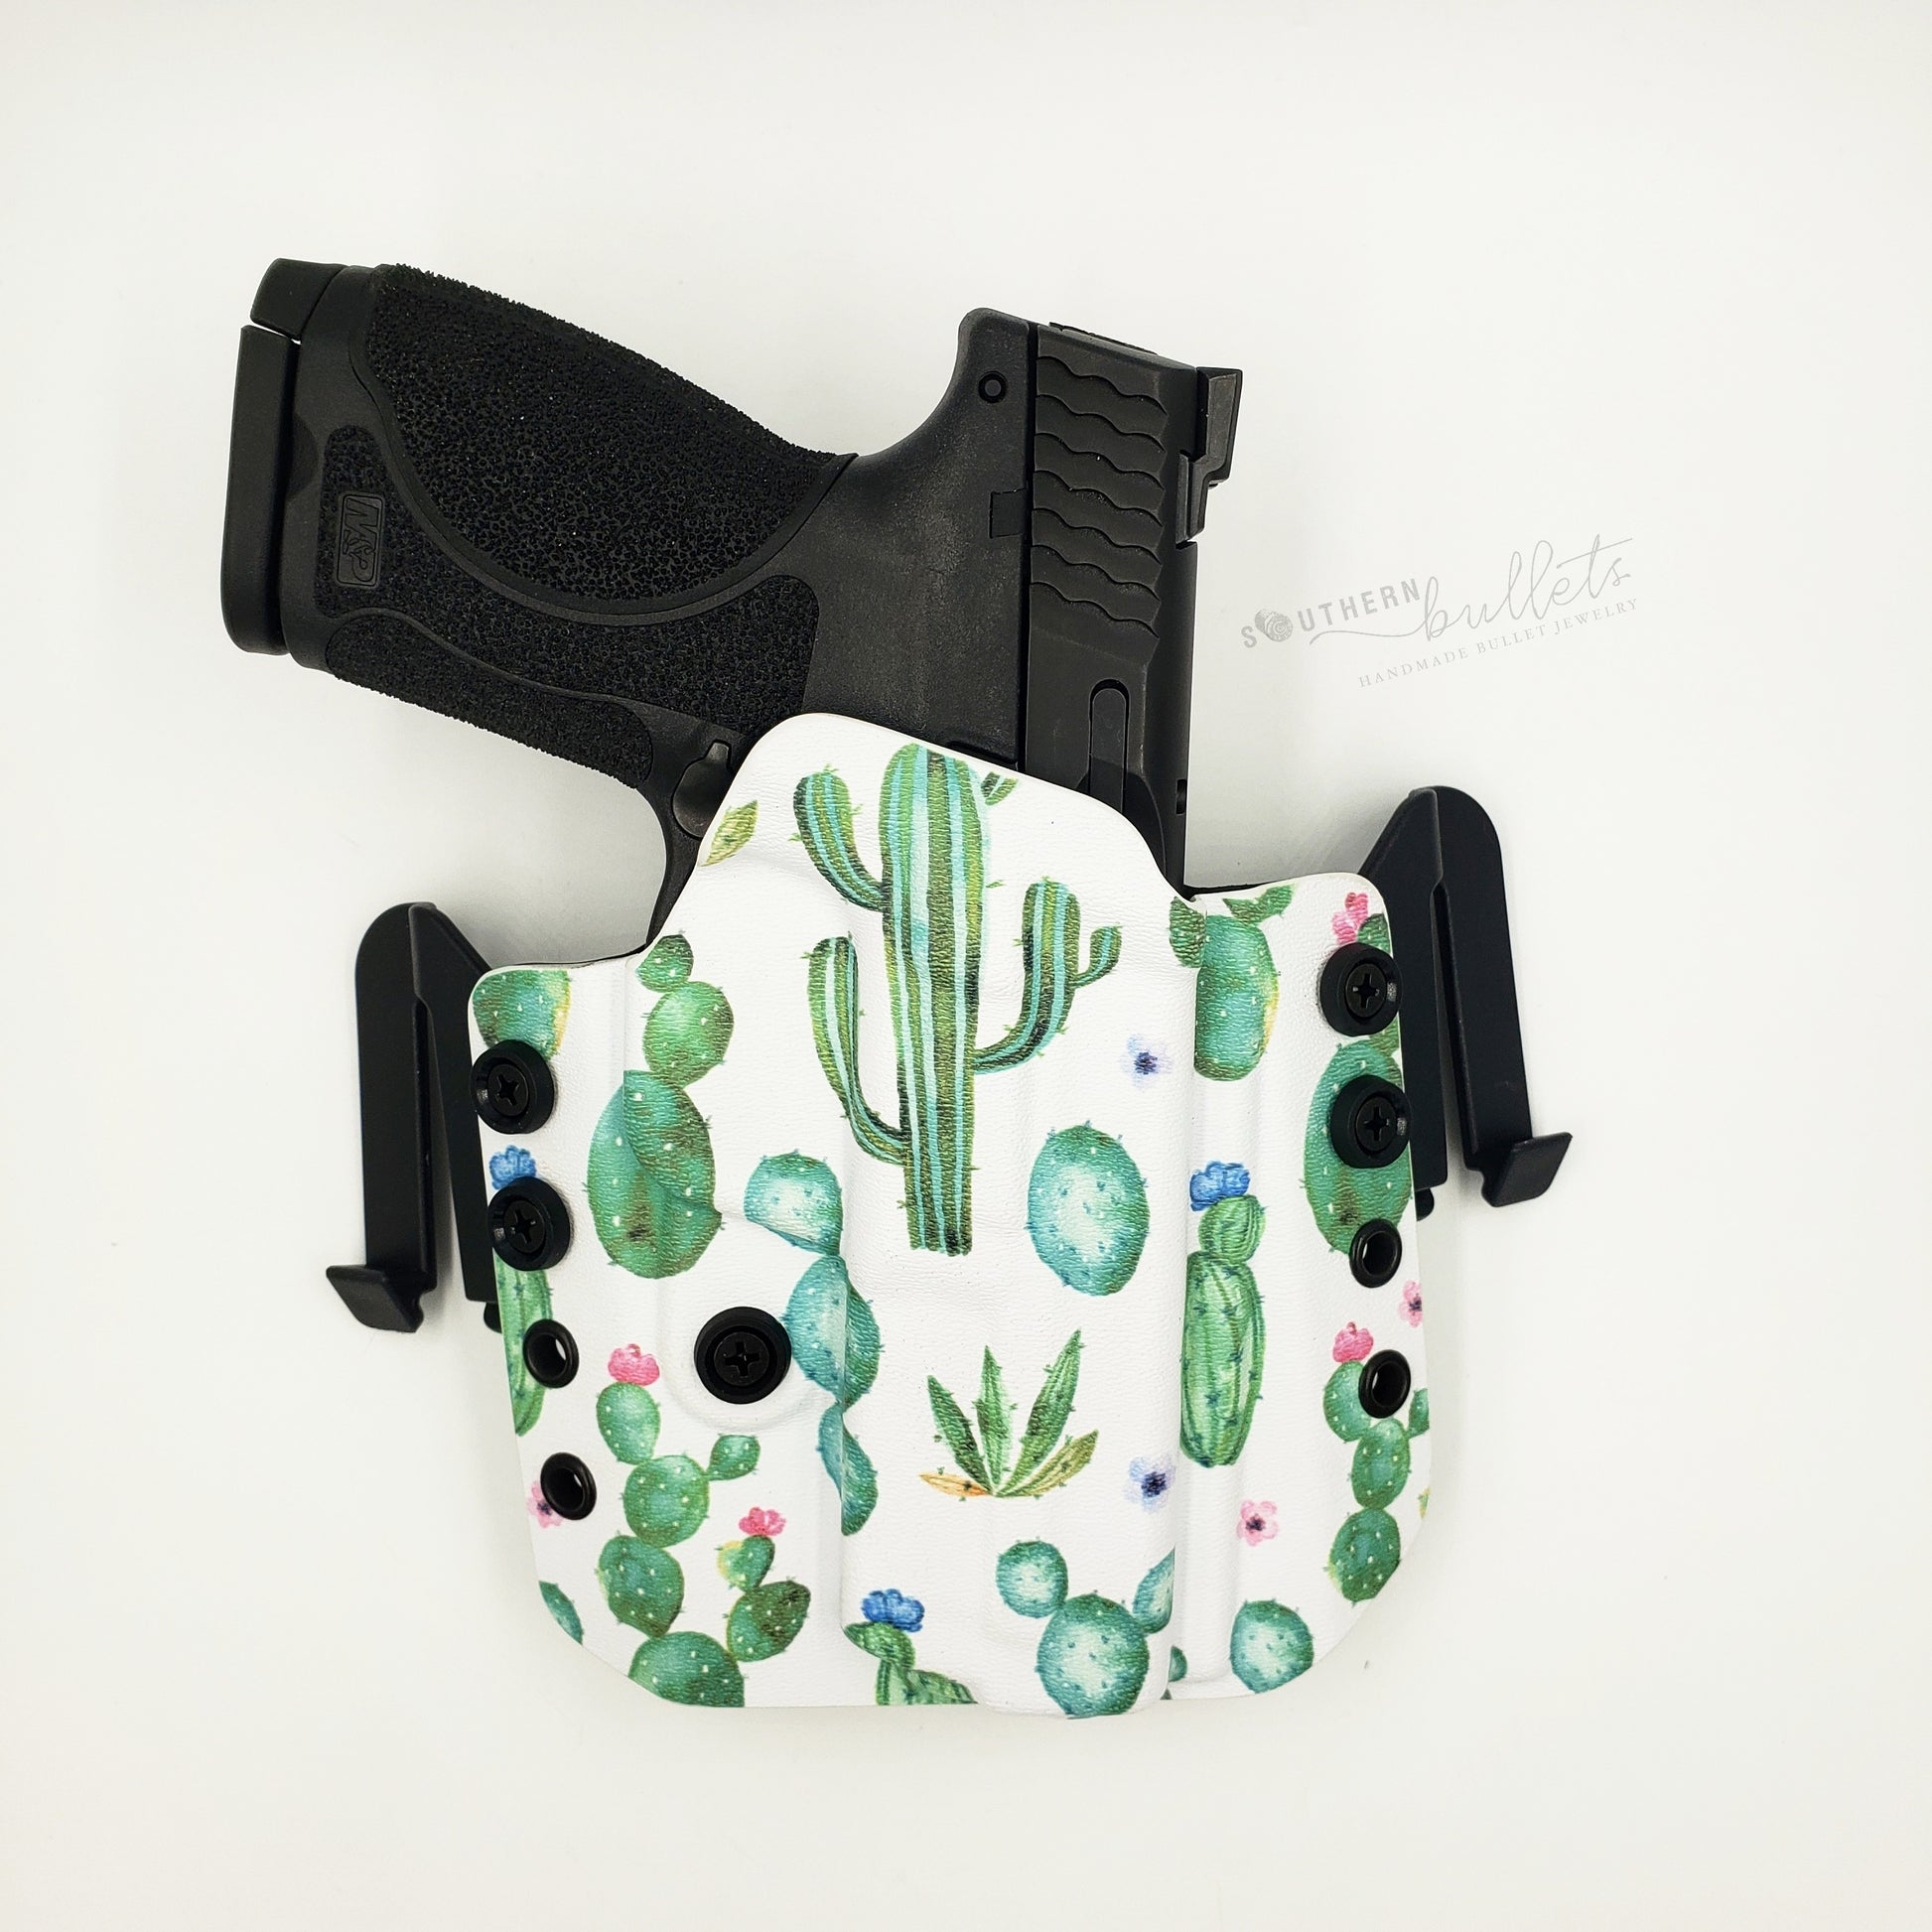 Wild Cactus Wingwomen OWB Holster Southern Bullets